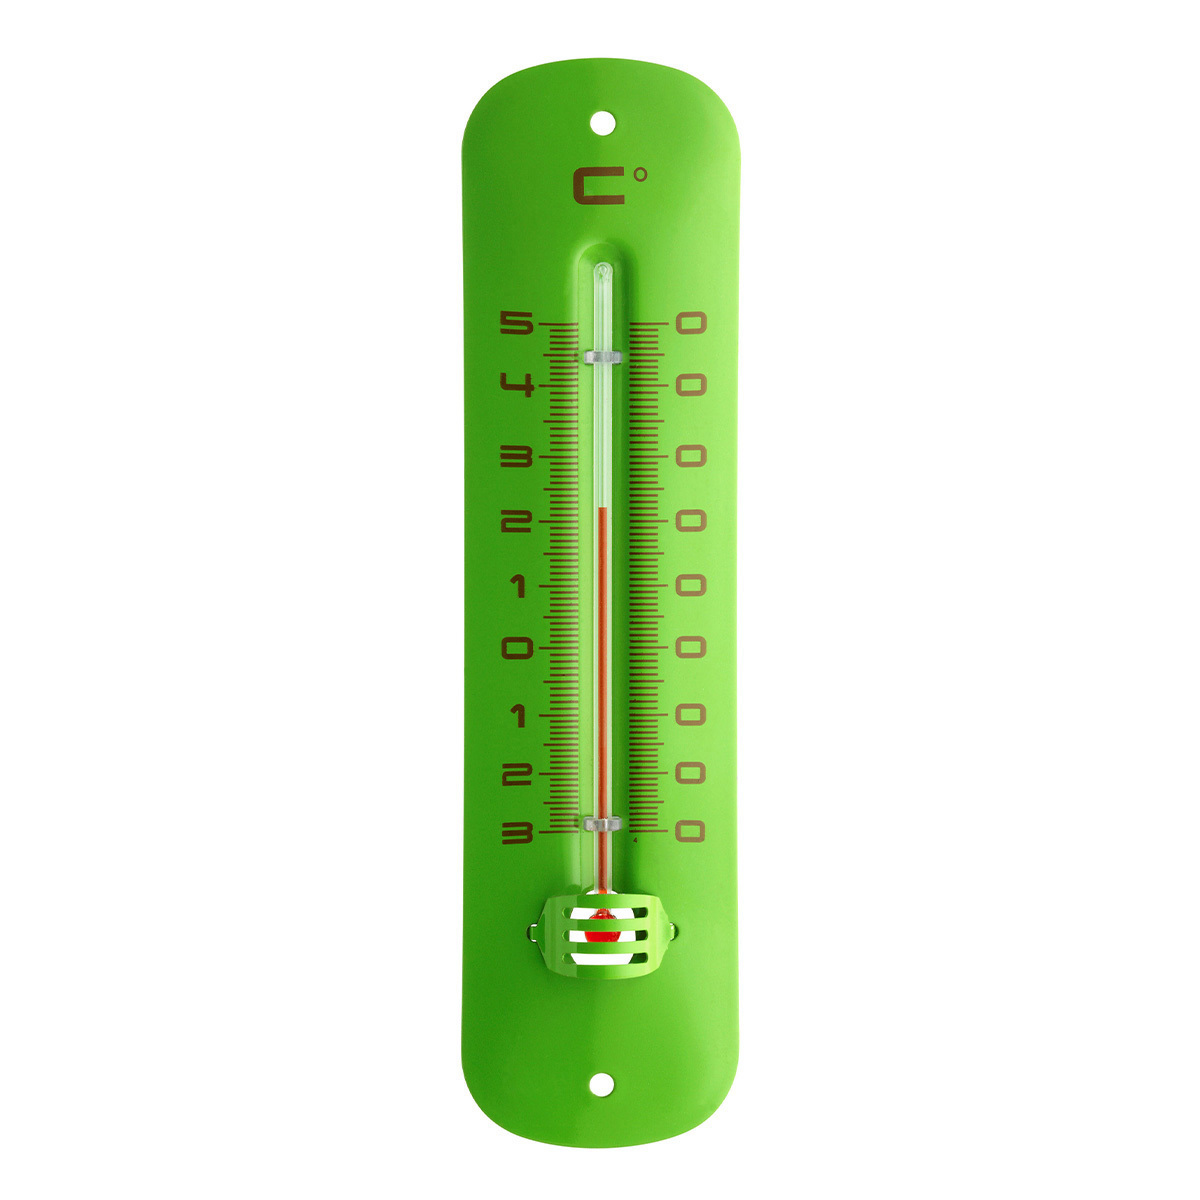 outdoor thermometer clipart